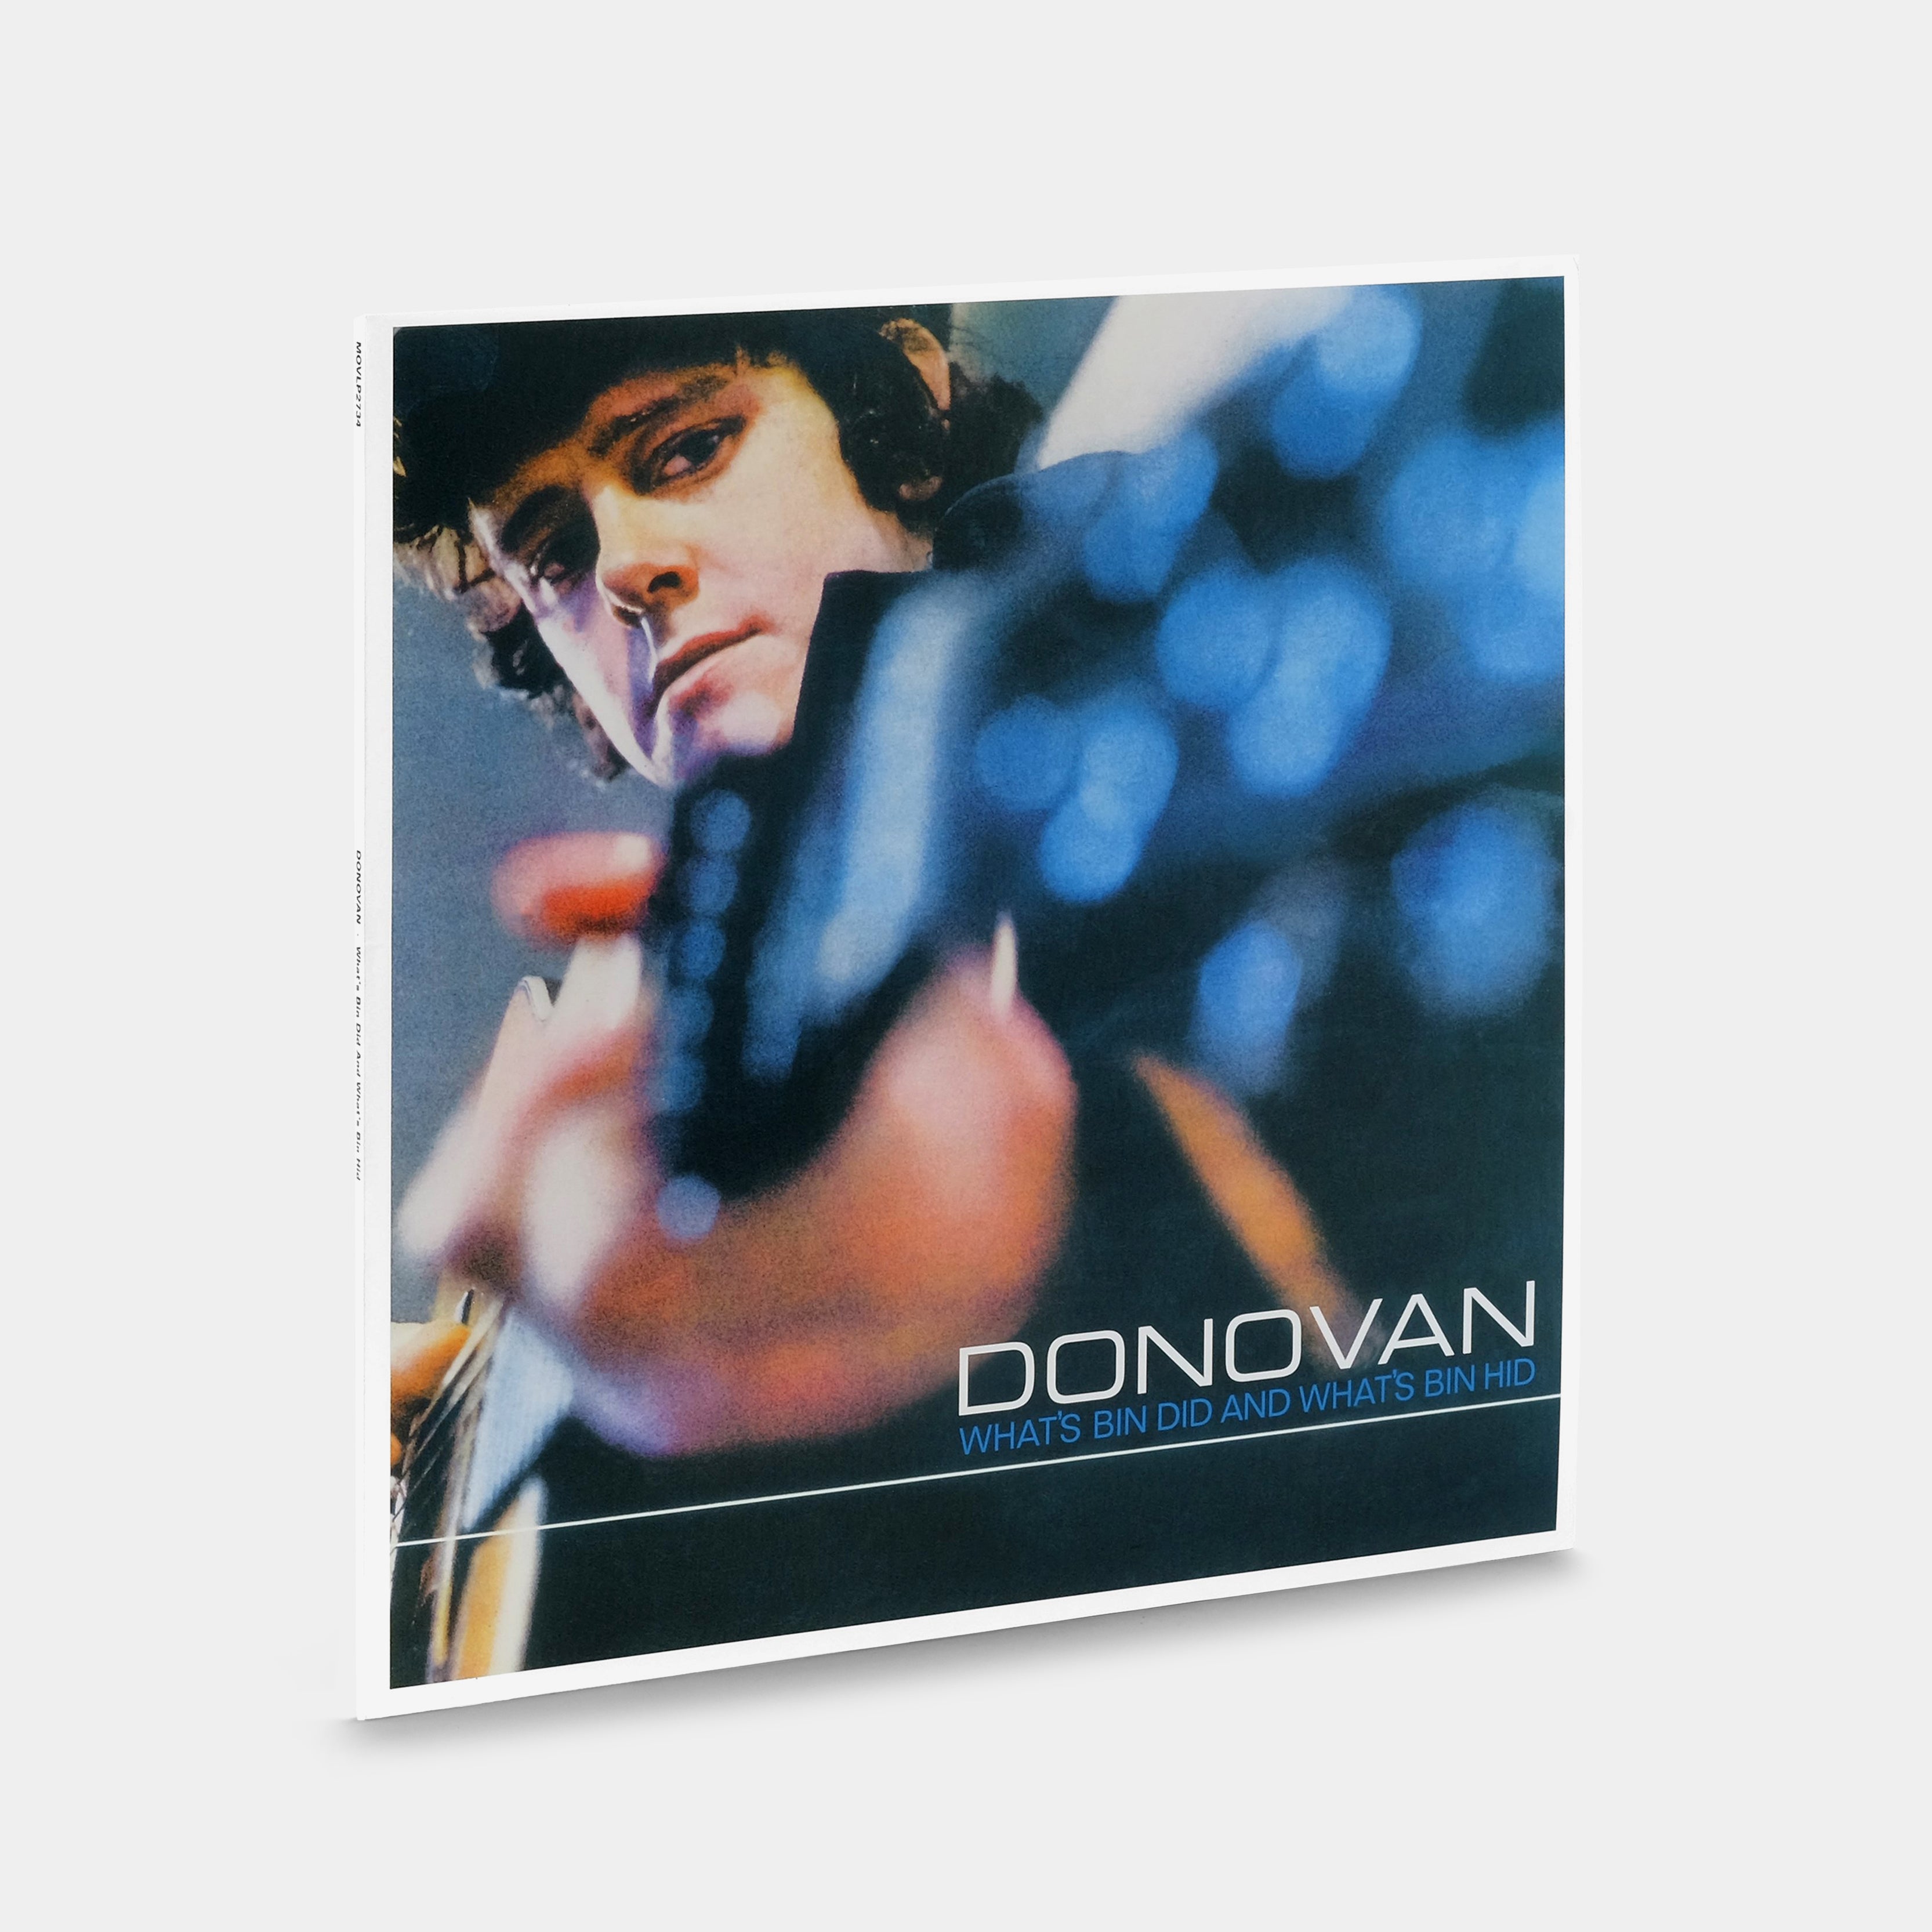 Donovan - What's Bin Did and What's Bin Hid LP Translucent Blue Vinyl Record